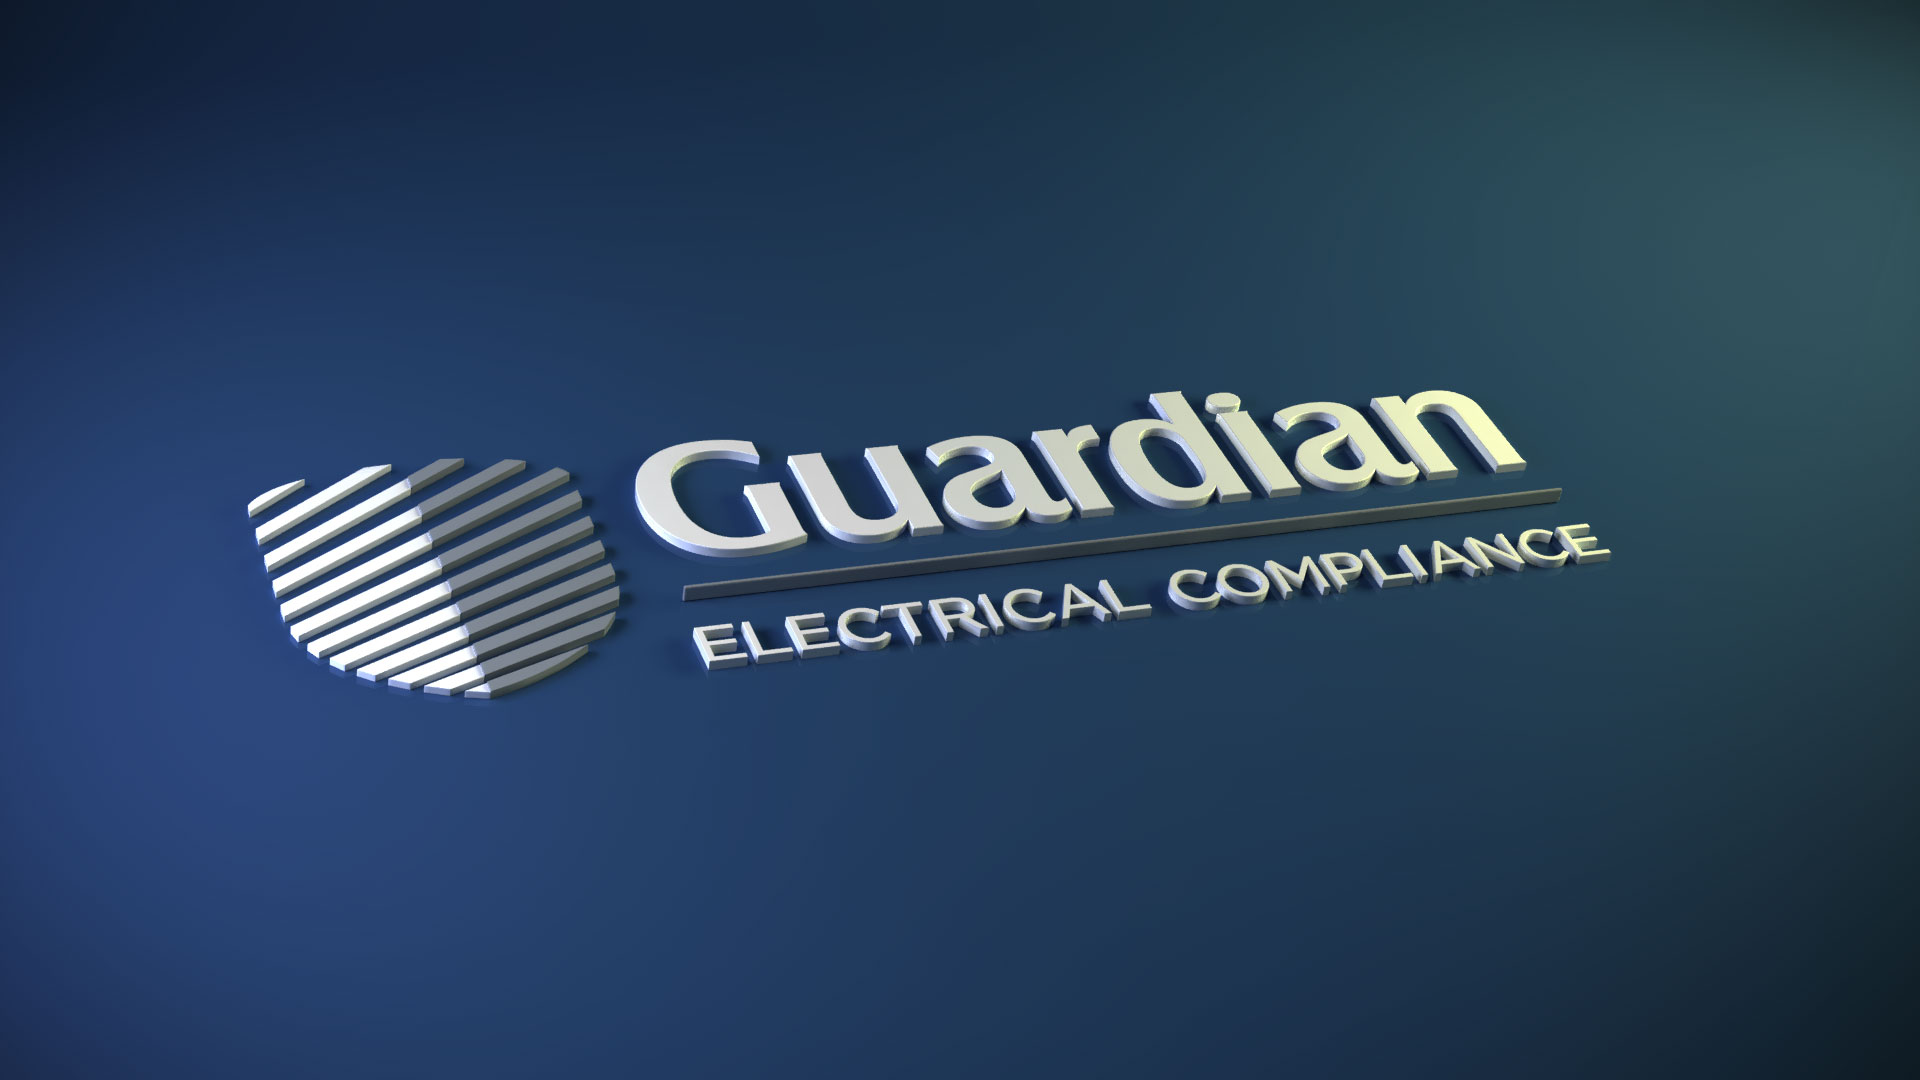 Guardian Electrical Compliance based in Sheffield will become part of the ever growing PTSG Group